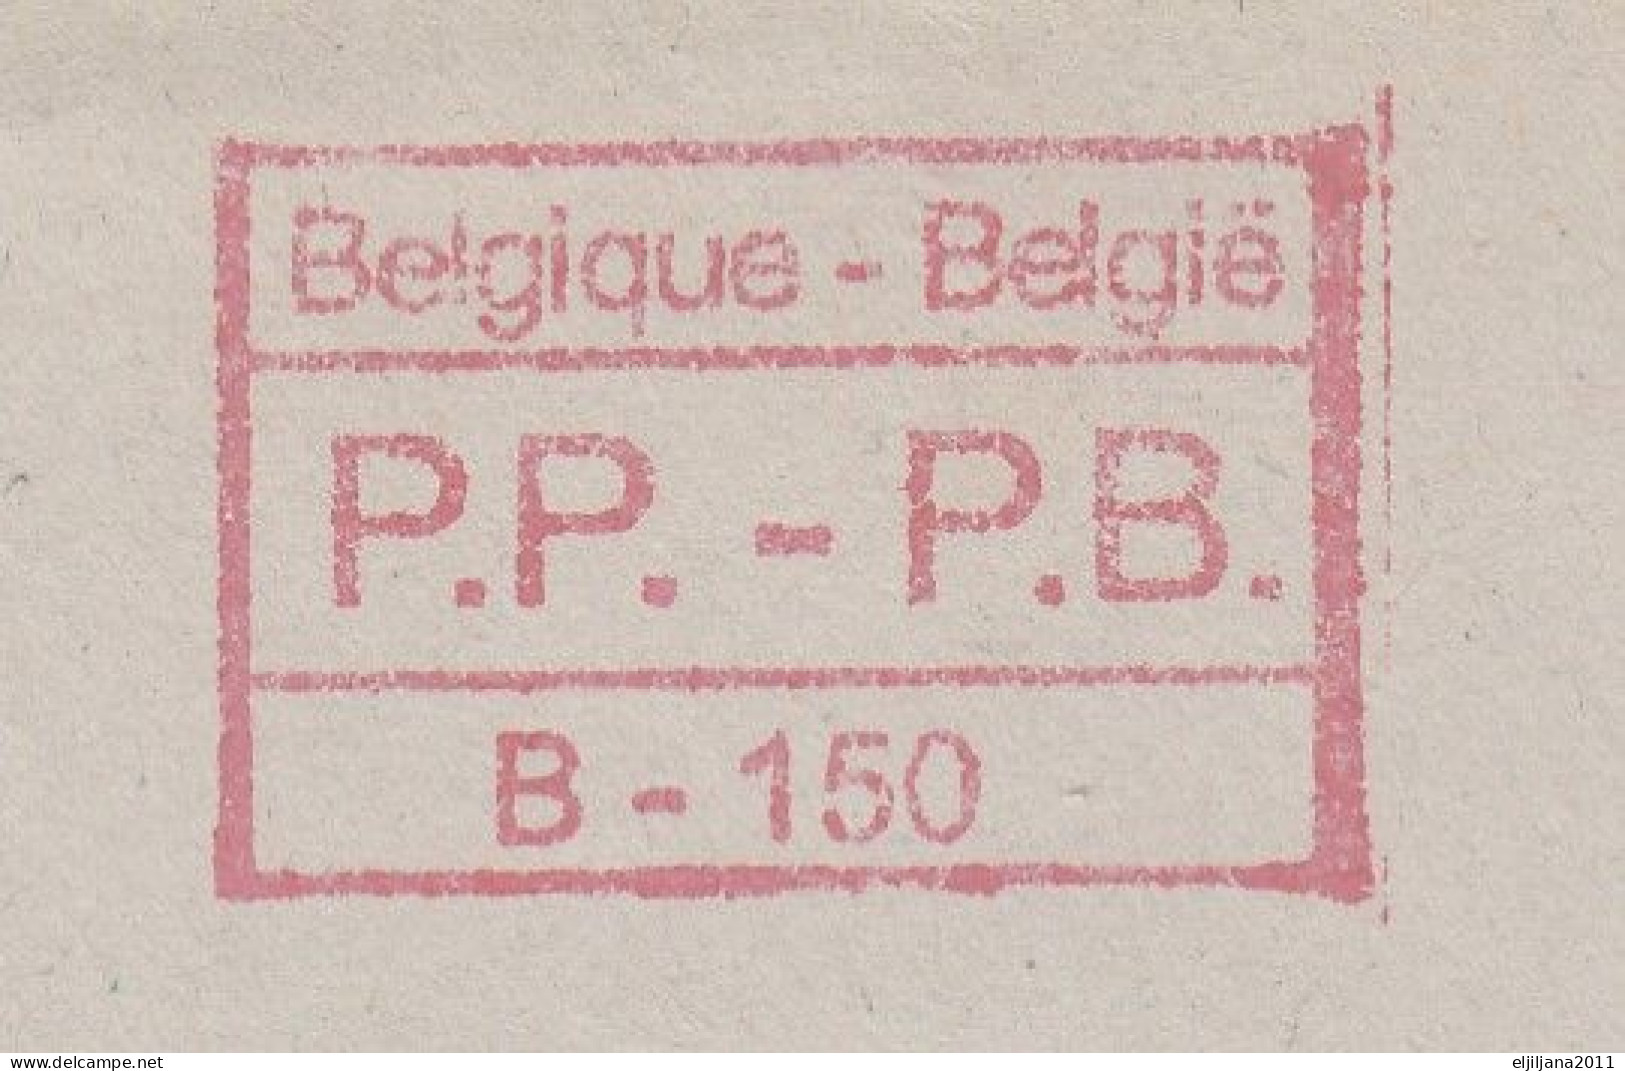 ⁕ Belgium / Belgique ⁕ Old Envelope With A Window P.P. - P.B. ⁕ Stationery Cover Mail Order Germany - Sobres